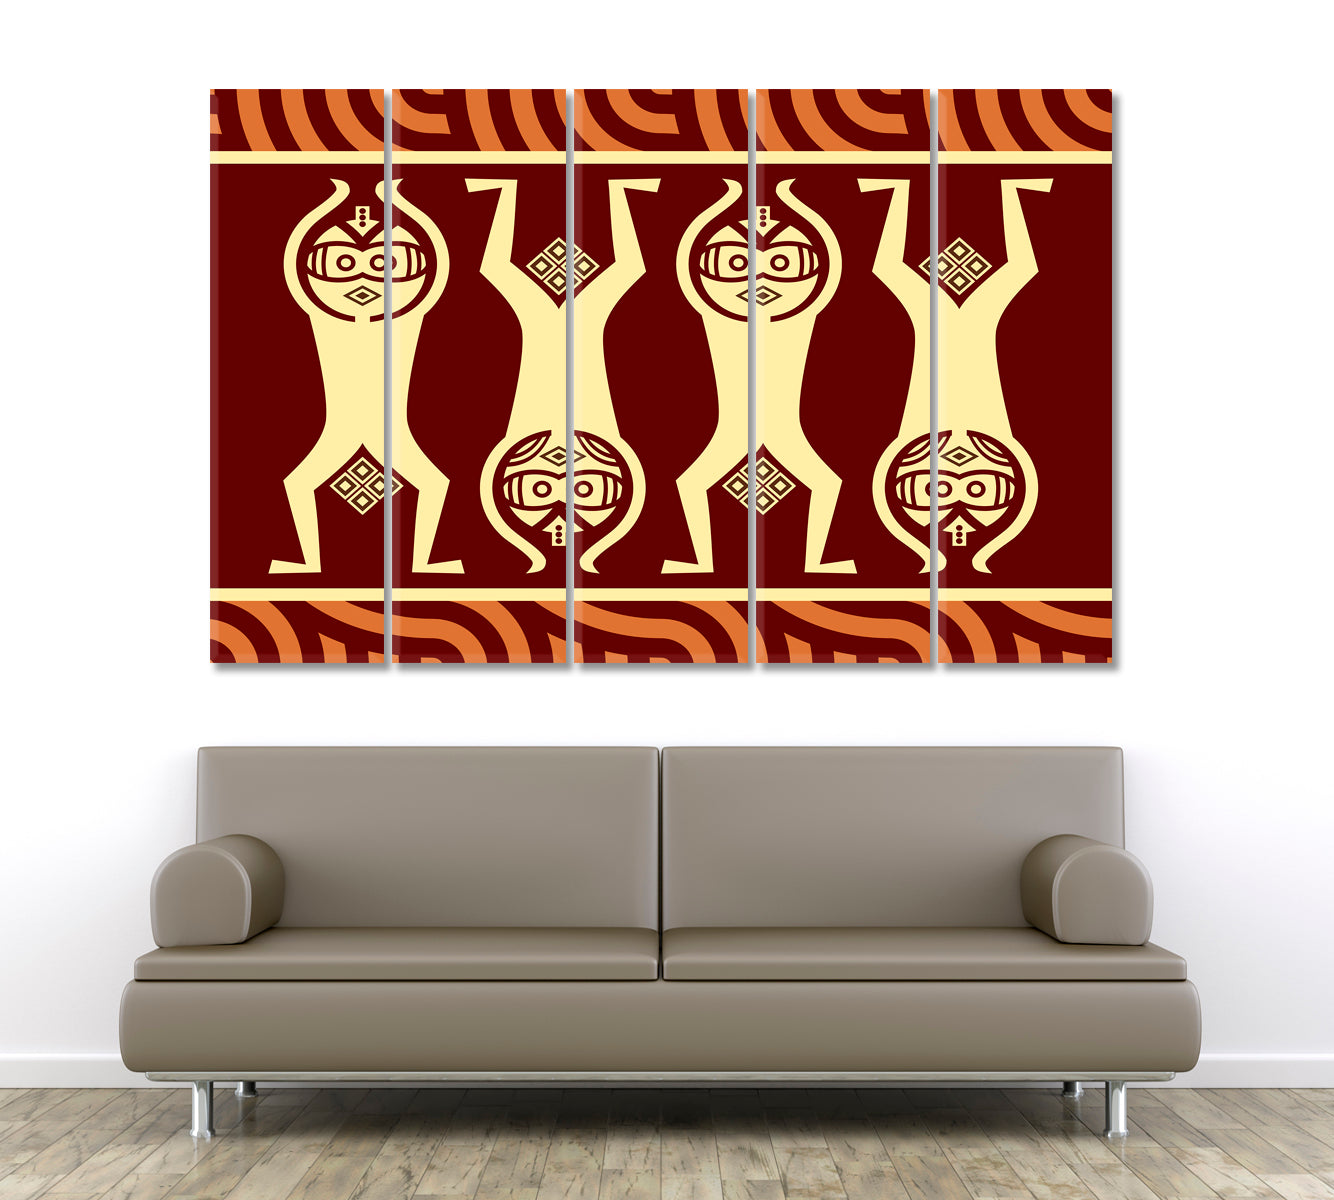 Abstract Indonesian Ethnic Pattern Abstract Art Print Artesty 5 panels 36" x 24" 